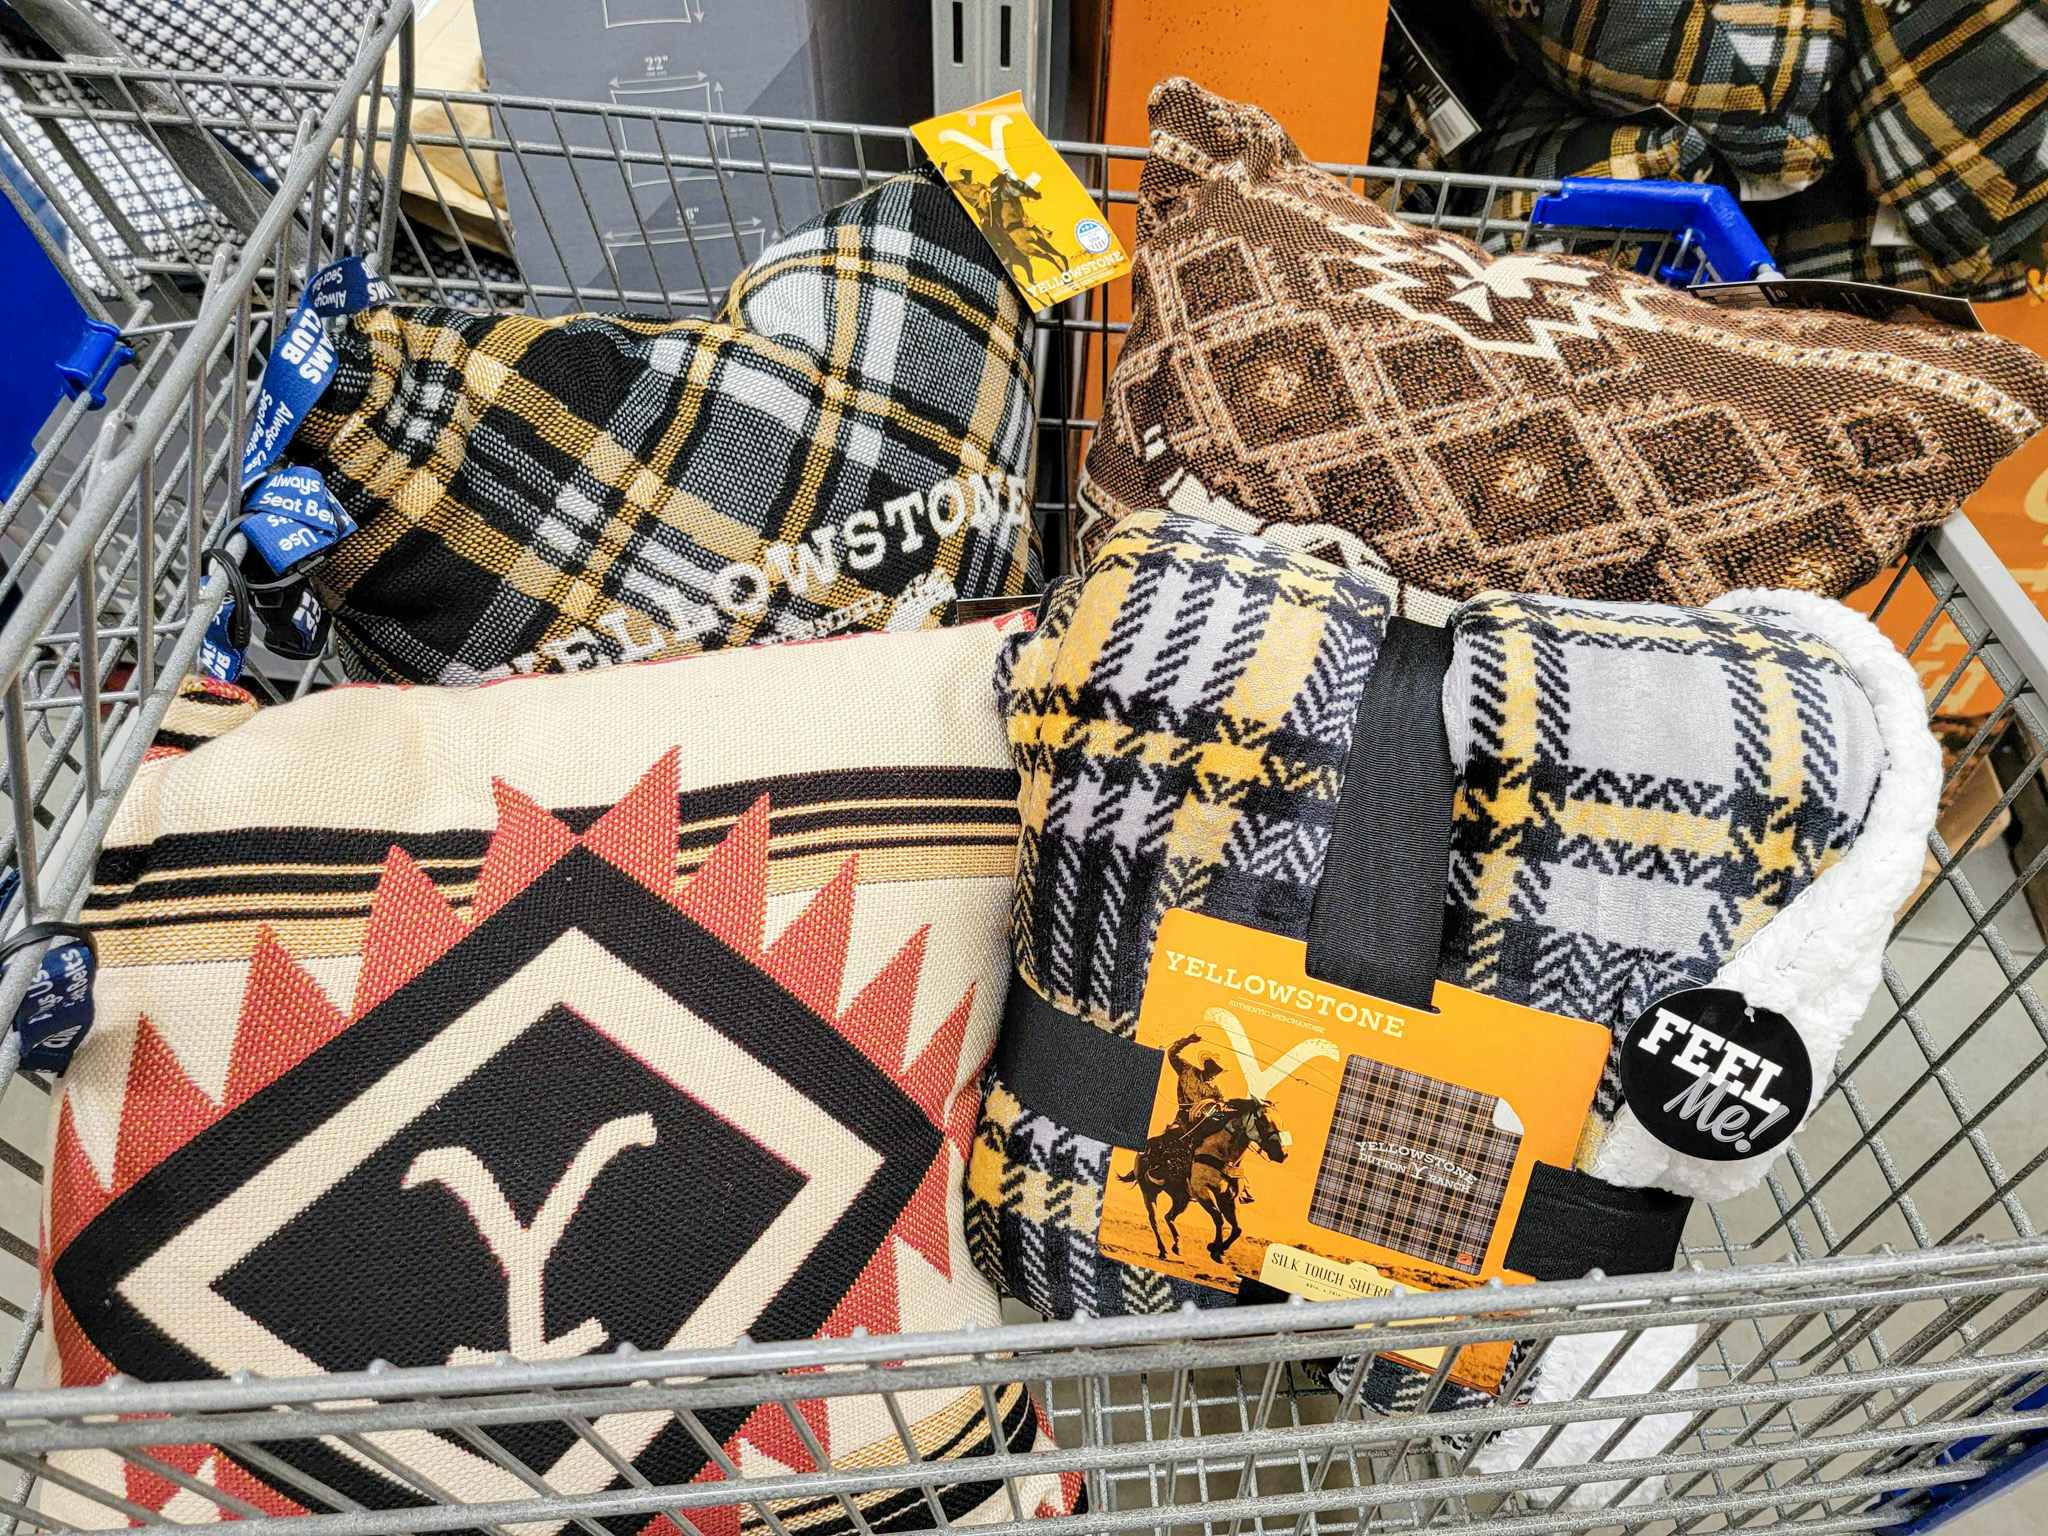 yellowstone blanket & pillows in a cart